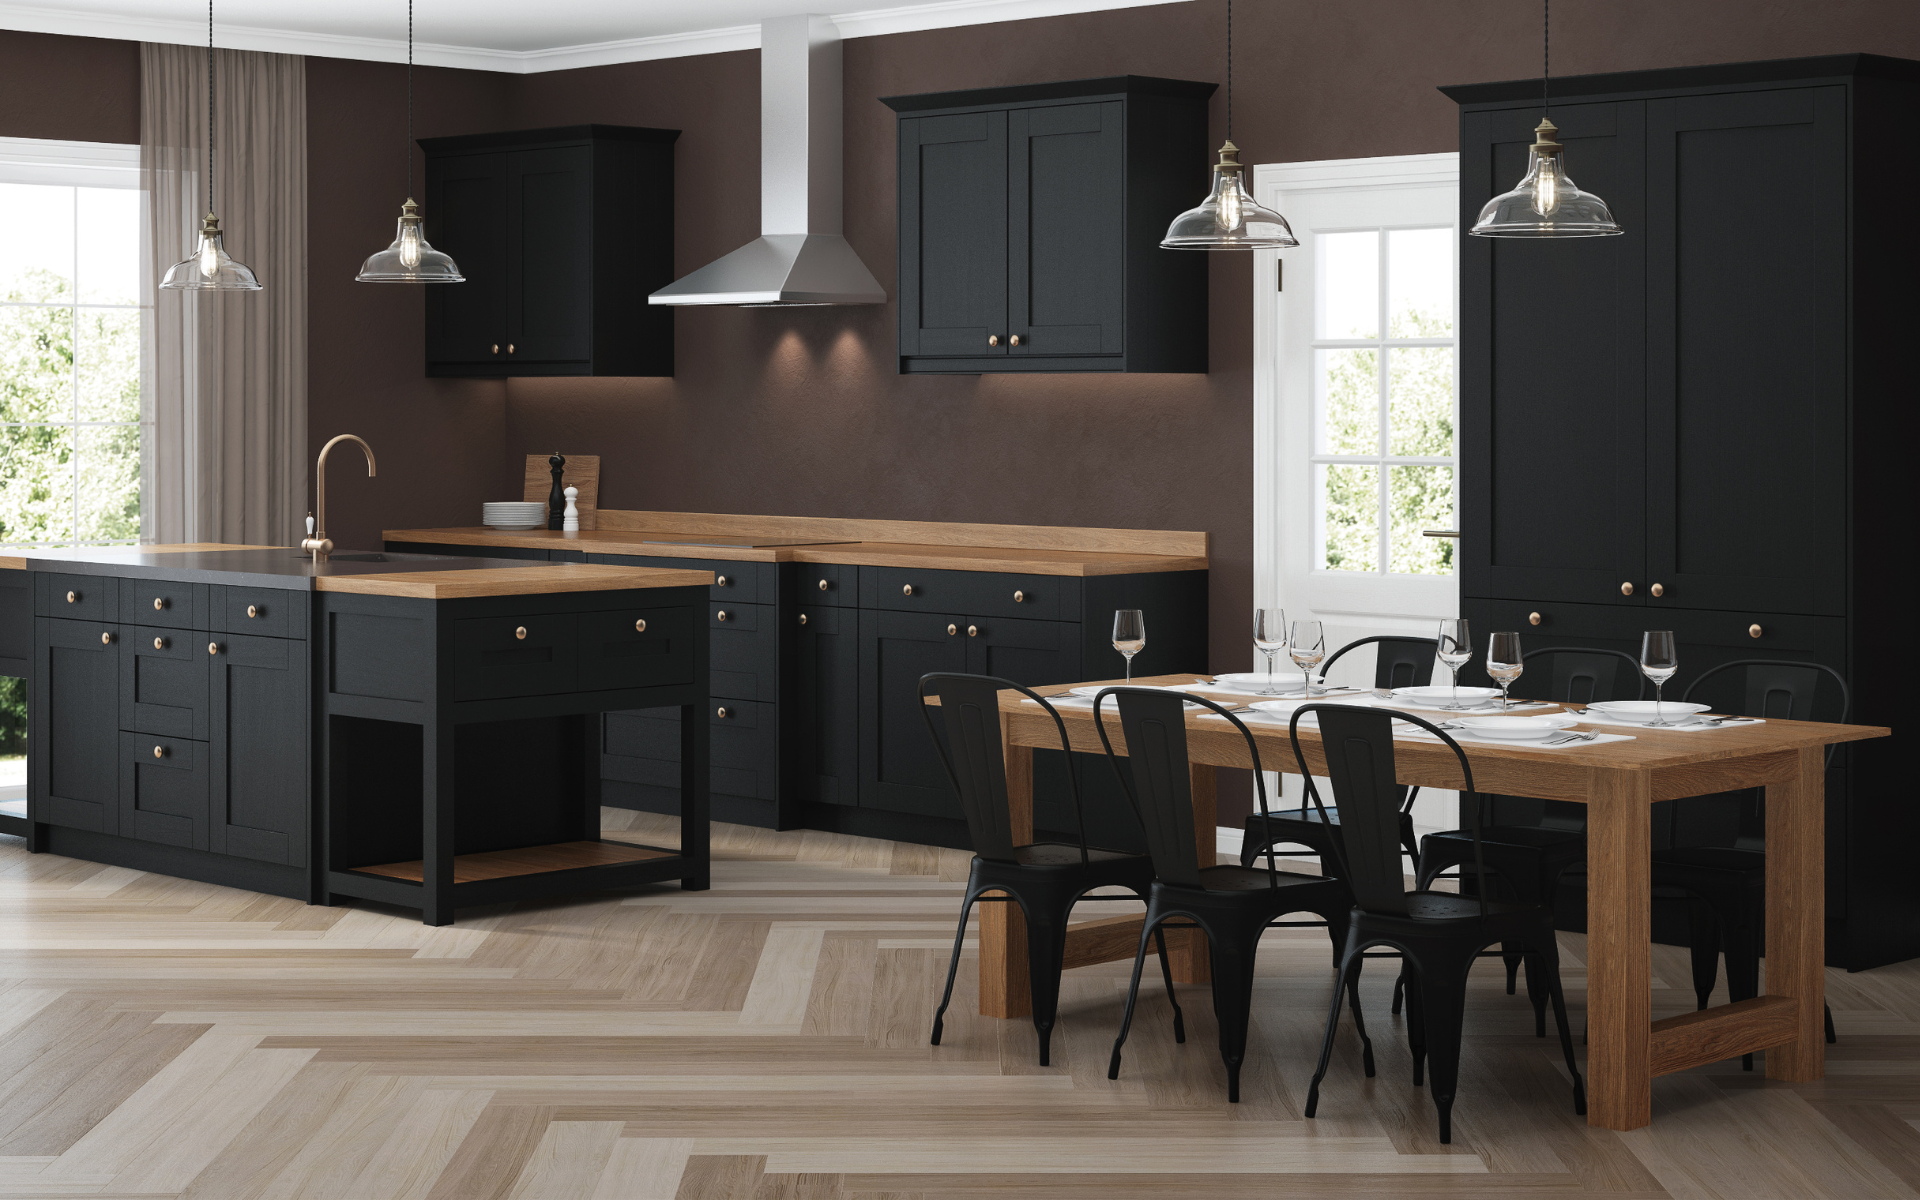 Modern style kitchen with black shaker cabinets, and wood countertop